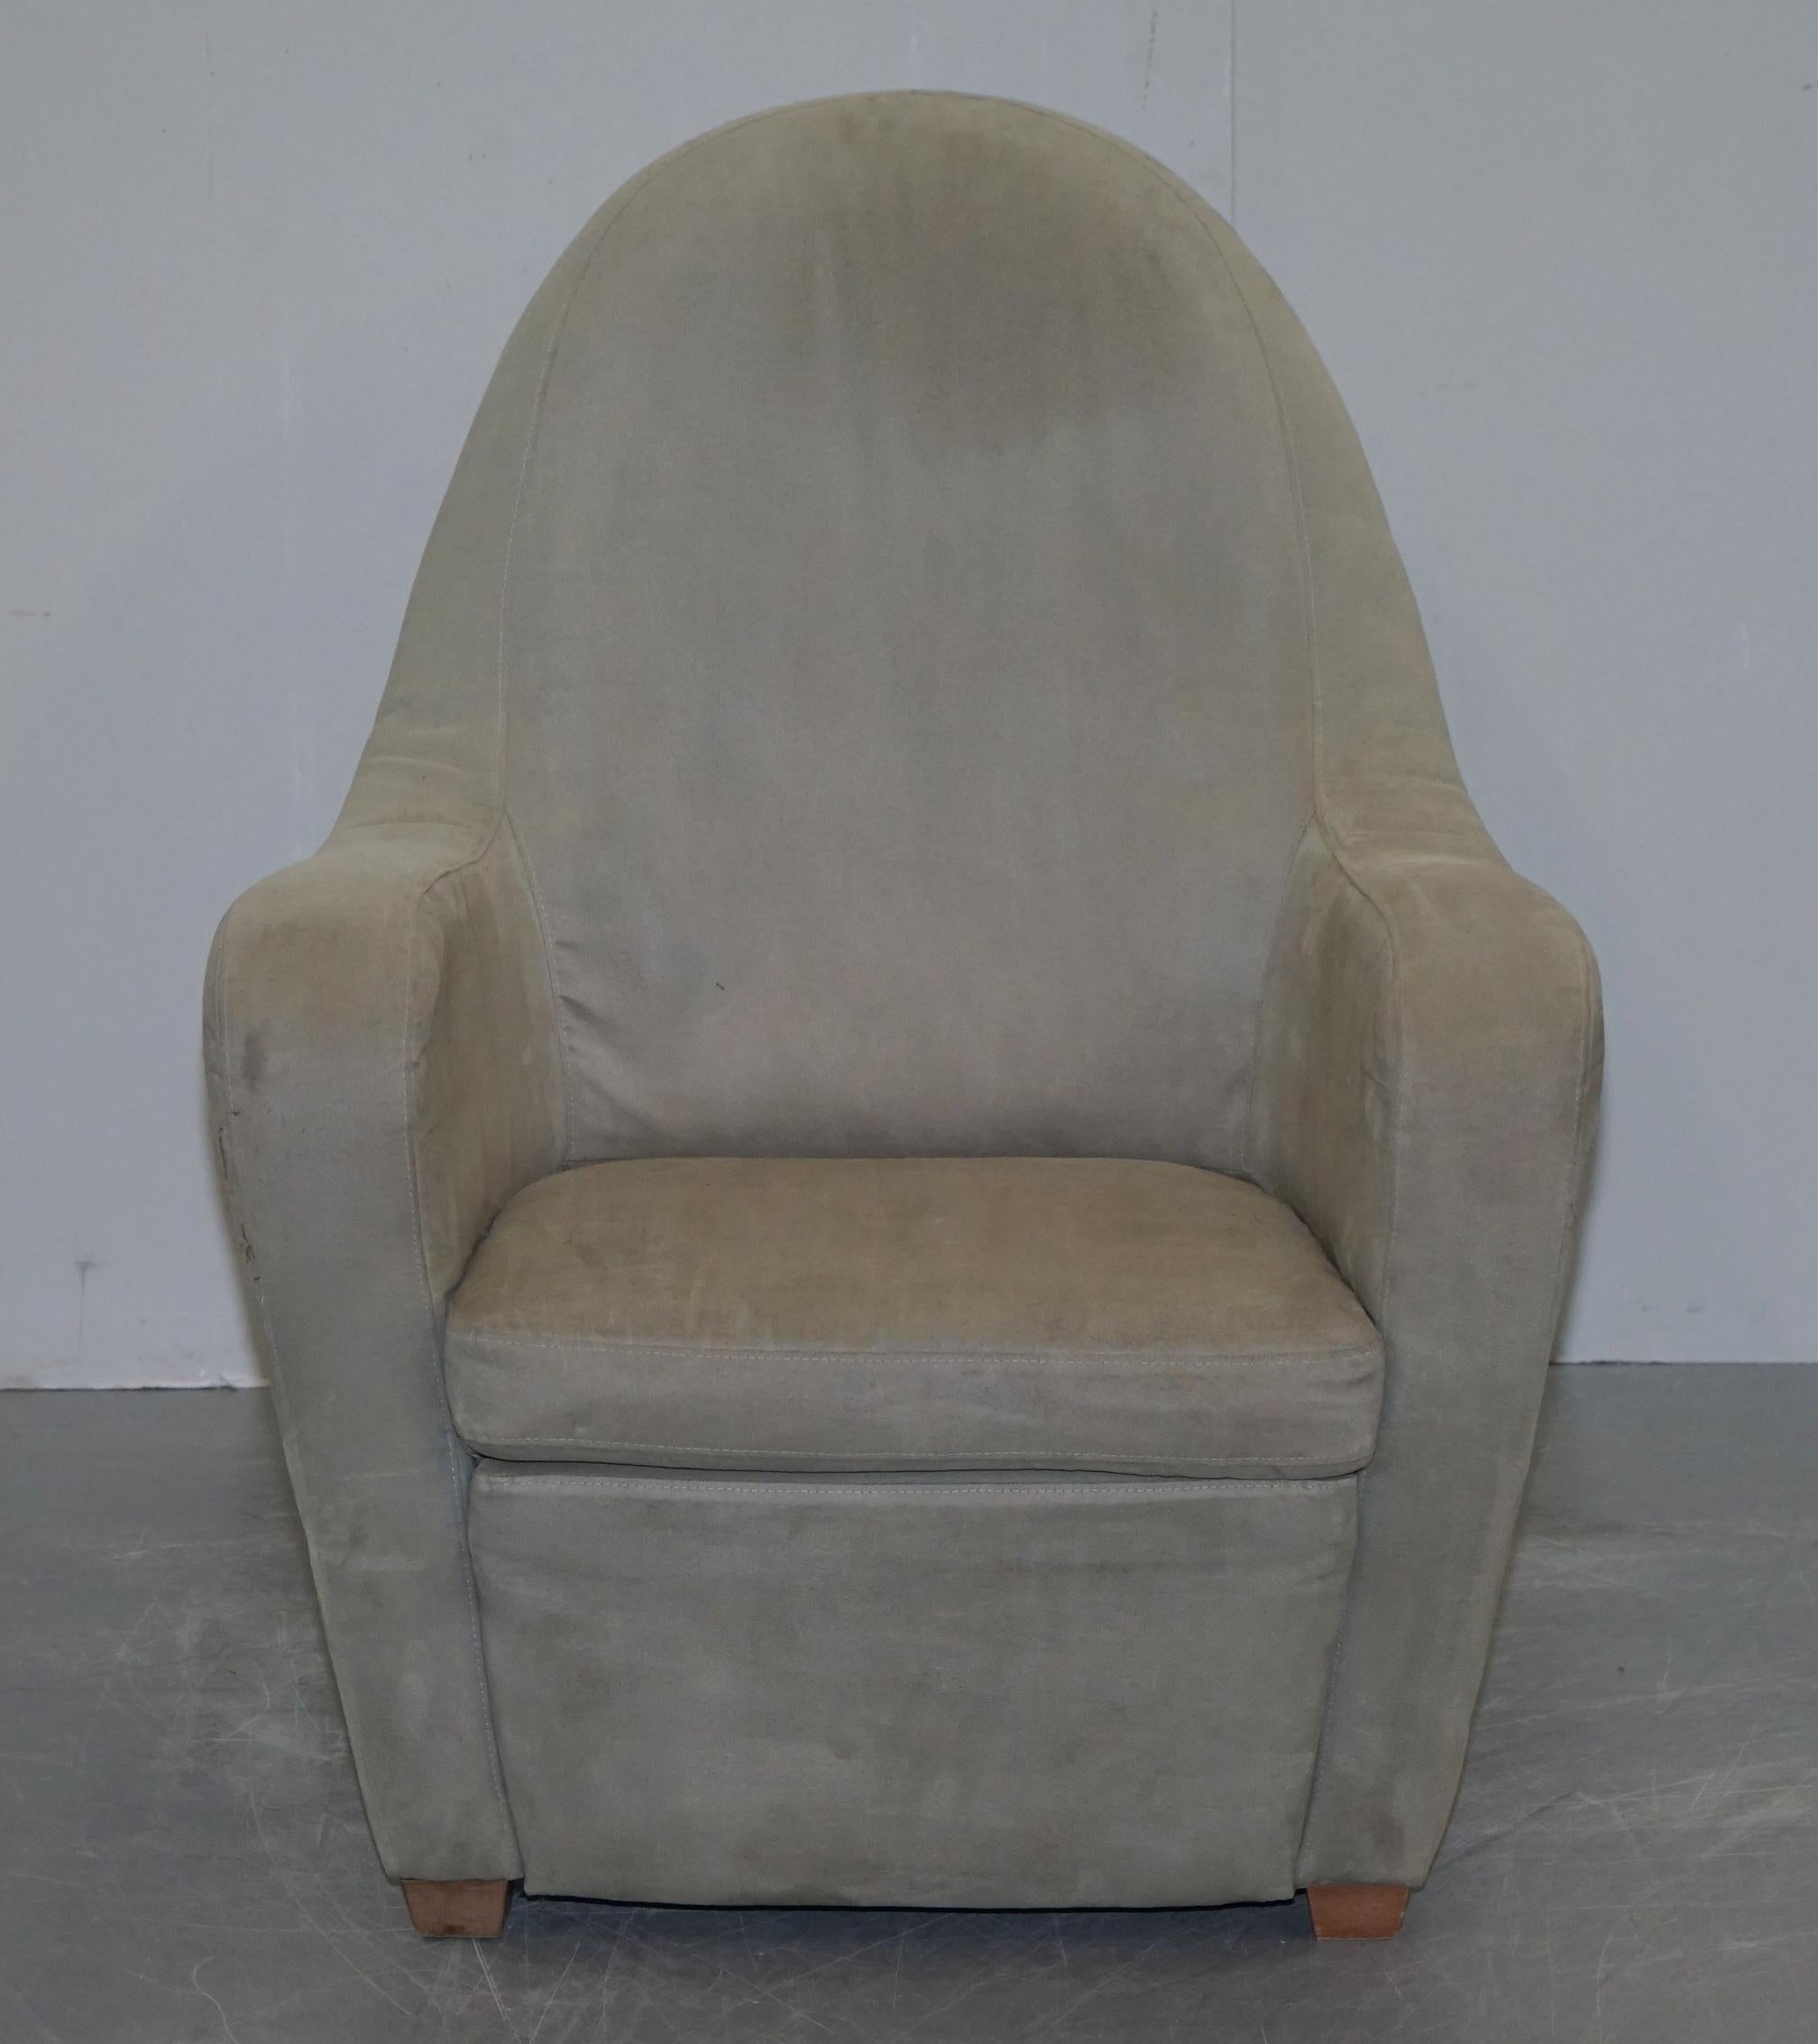 We are delighted to offer for sale this rather expensive hand made in Italy Natuzzi curved back armchair upholstered in grey suede

This chair need has been professionally upholstery cleaned, it is now fresh and ready to go. In the photos there